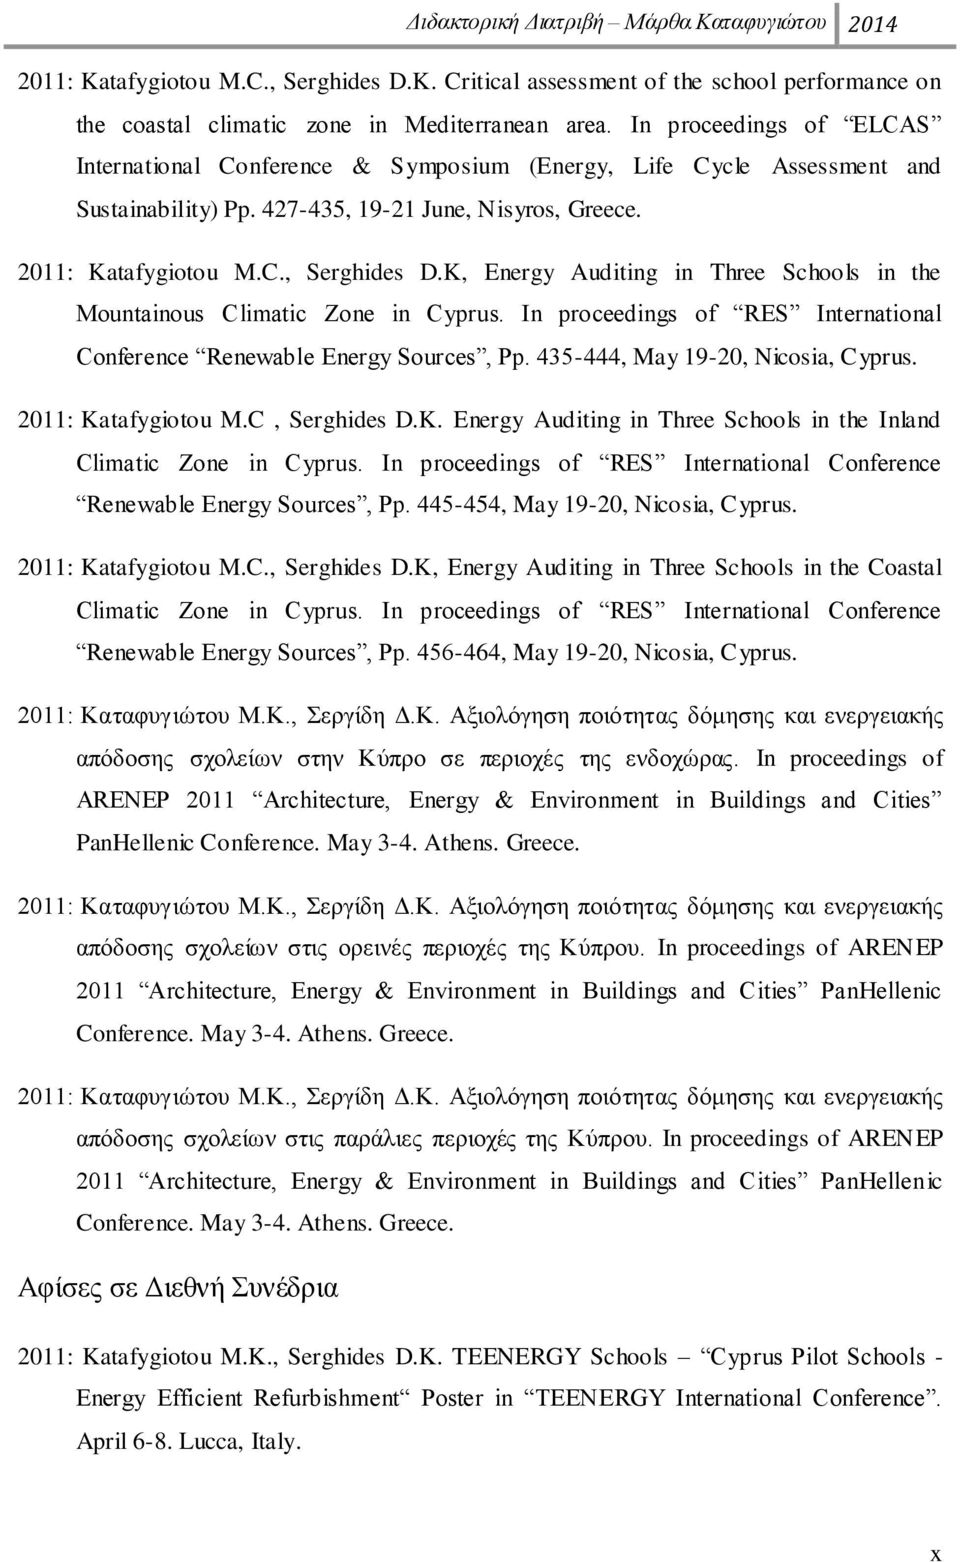 K, Energy Auditing in Three Schools in the Mountainous Climatic Zone in Cyprus. In proceedings of RES International Conference Renewable Energy Sources, Pp. 435-444, May 19-20, Nicosia, Cyprus.